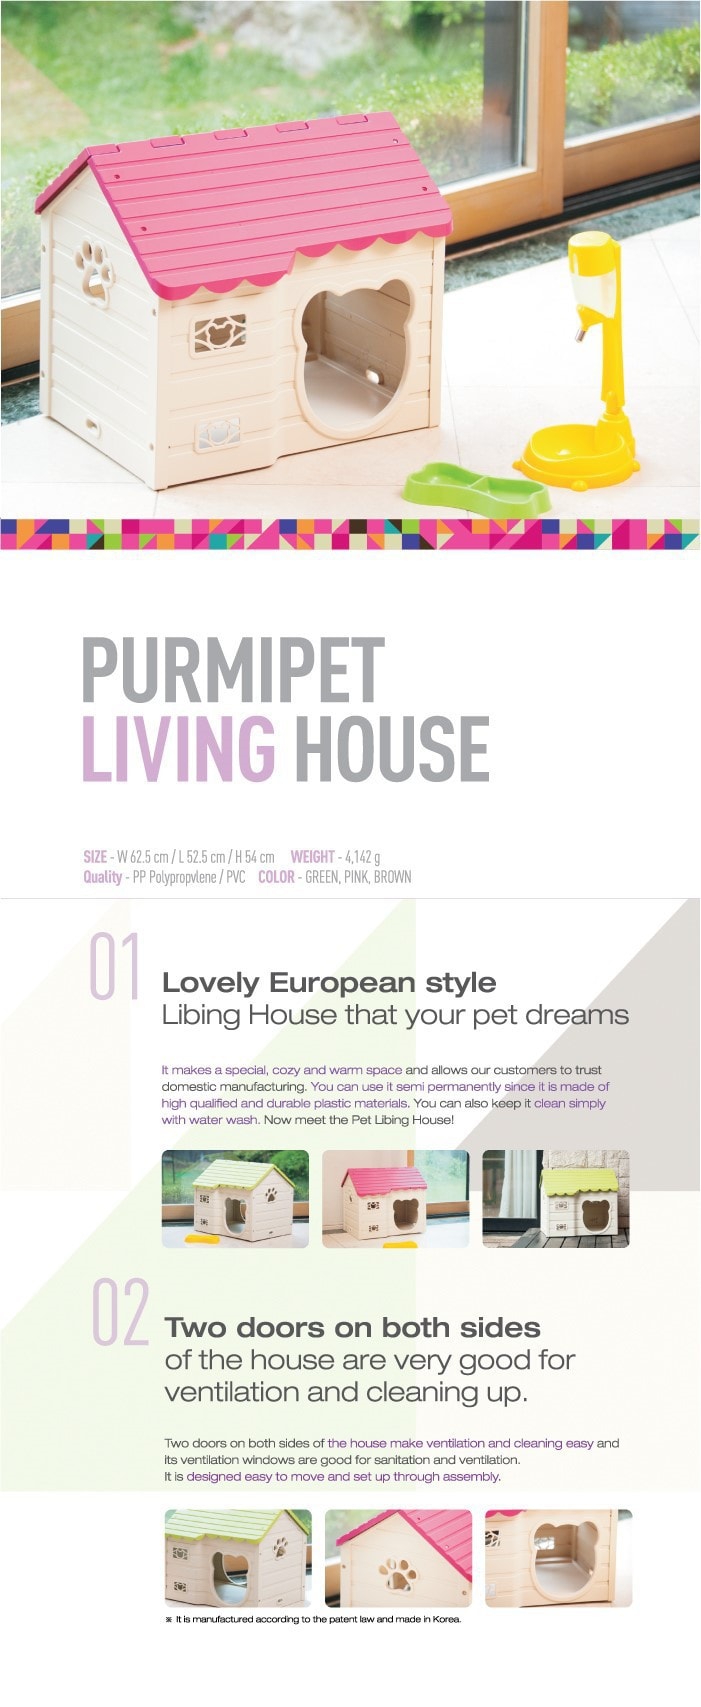 Pet Living House #brown